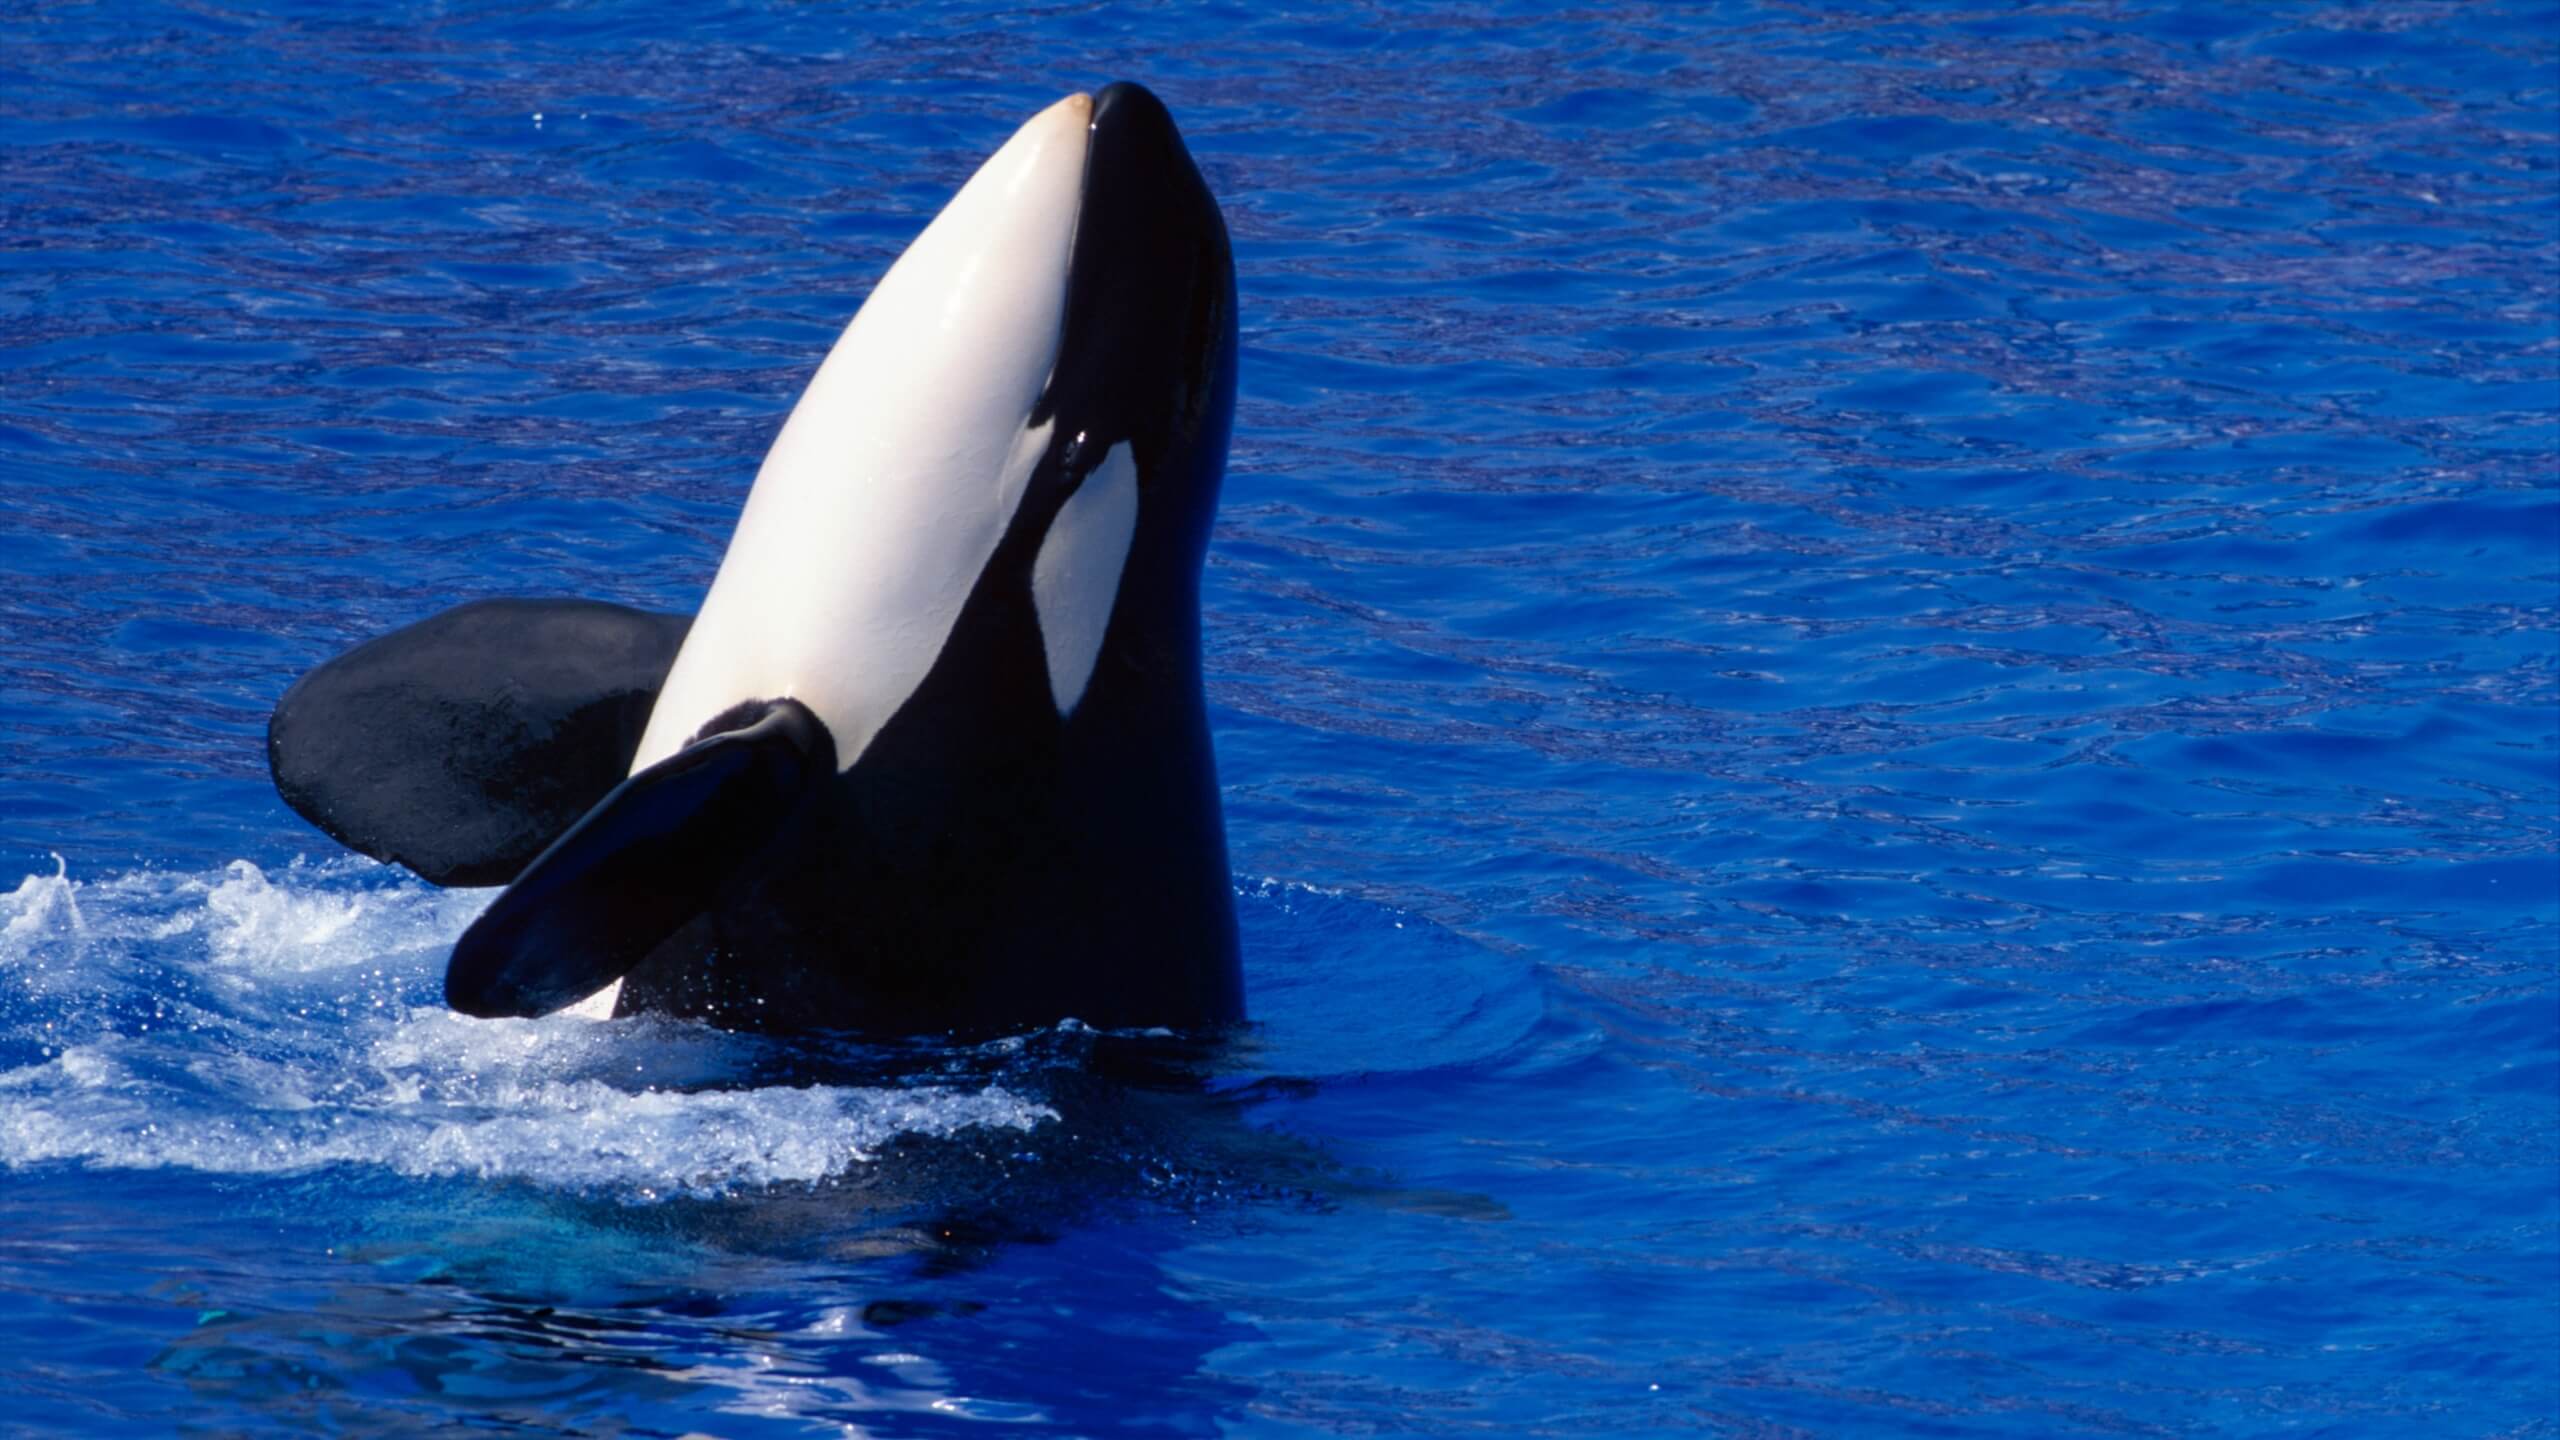 However, despite its bigger size, the killer whale is still a dolphin according to the rules of taxonomy.